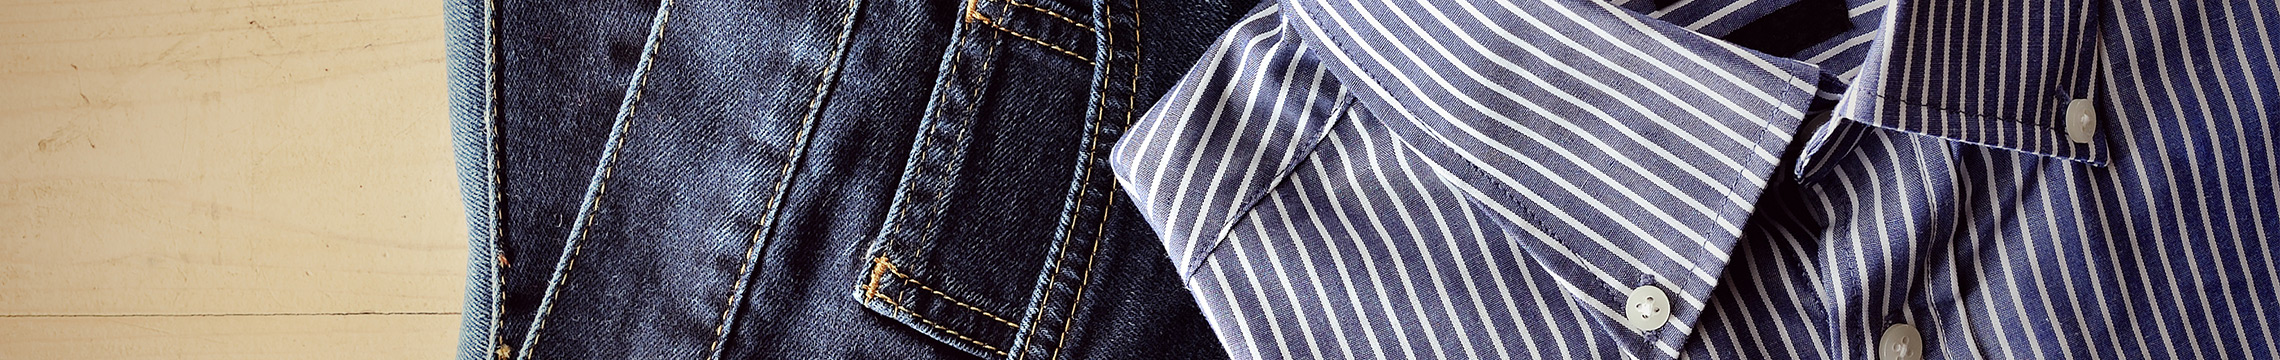 Men's striped Oxford shirt with dark denim and a black leather belt